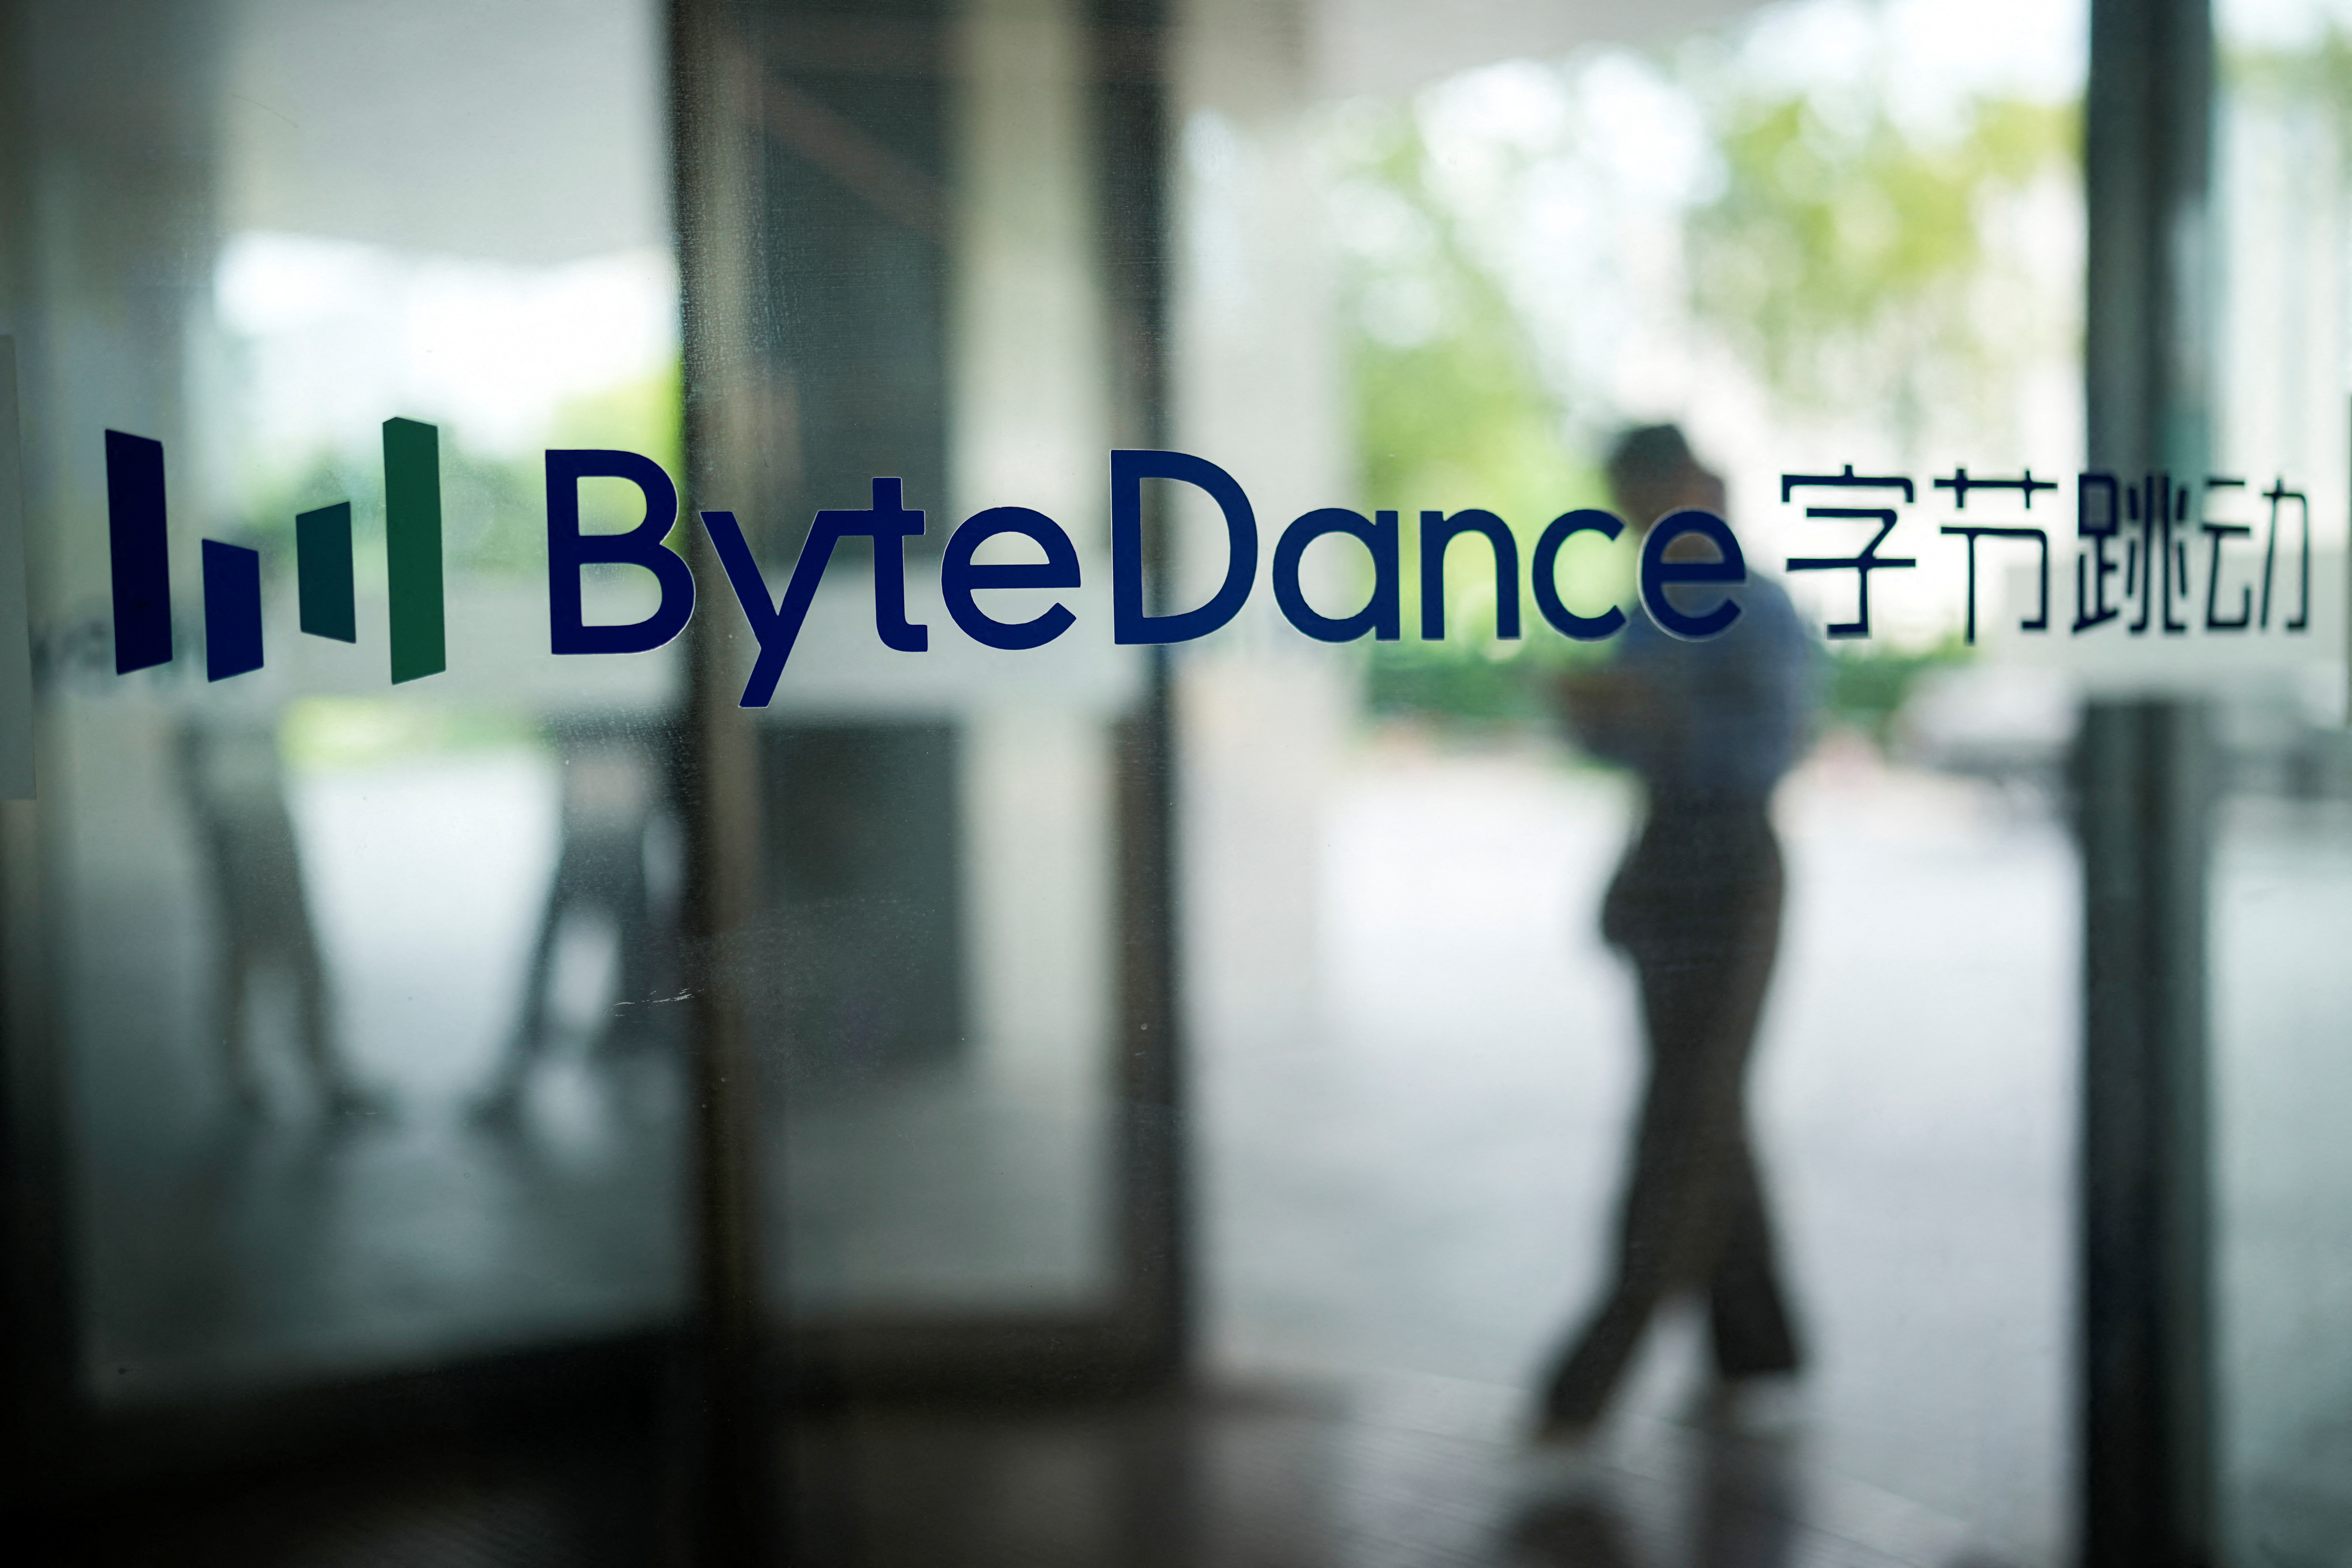 The ByteDance logo is seen at the company's office building in Shanghai